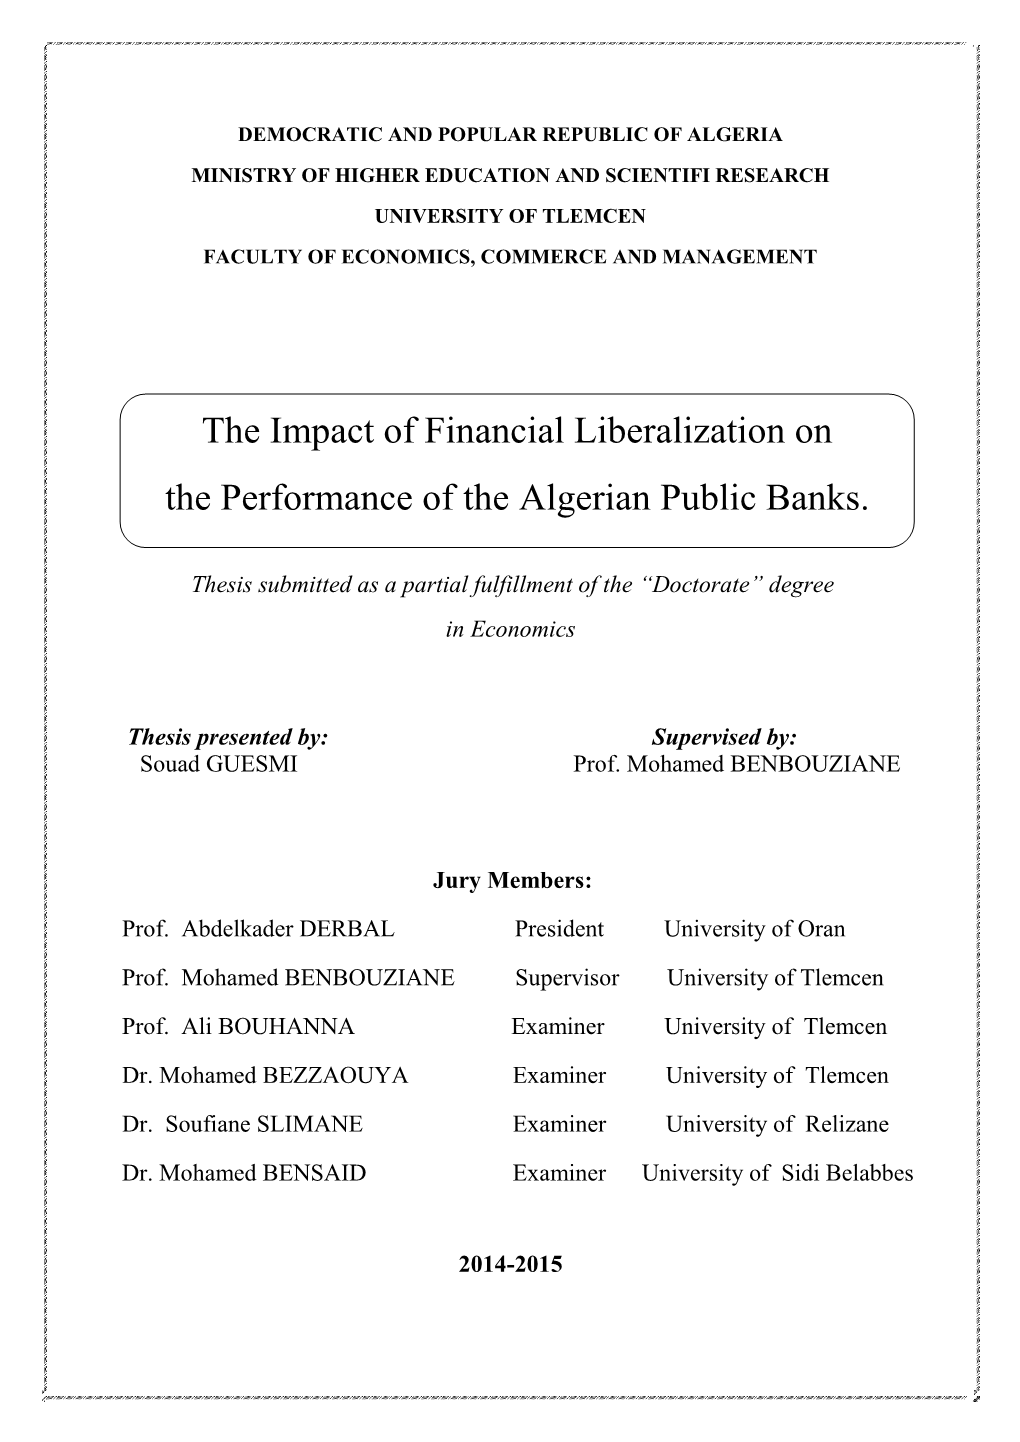 The Impact of Financial Liberalization on the Performance of the Algerian Public Banks